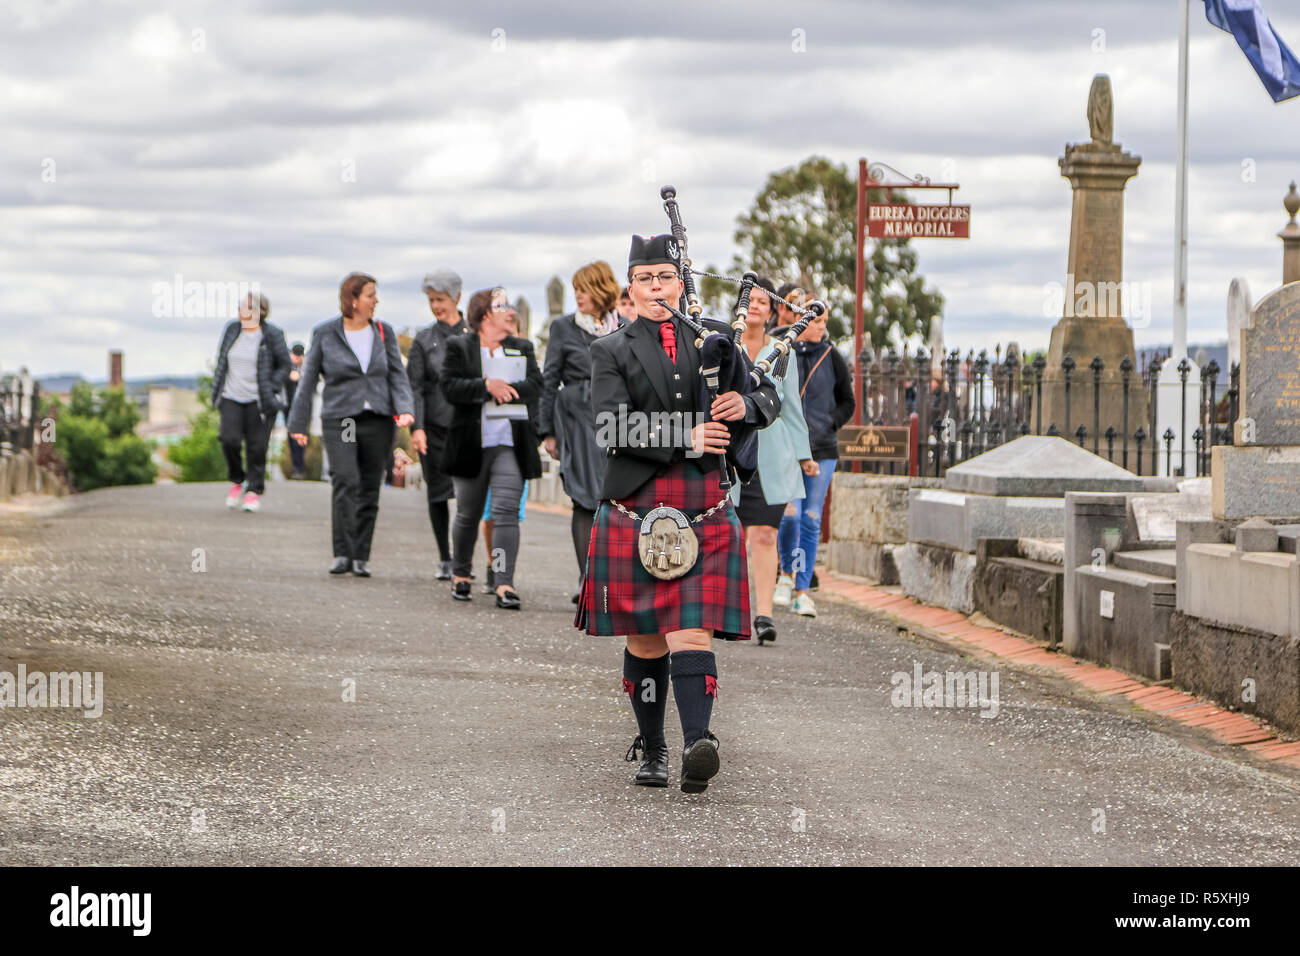 Old Ballarat Cemetery, Ballarat, Victoria, Australia. 3rd Dec 2018. The march to the Eureka diggers grave sites led the piper Amber Ives. Credit: brett keating/Alamy Live News Stock Photo